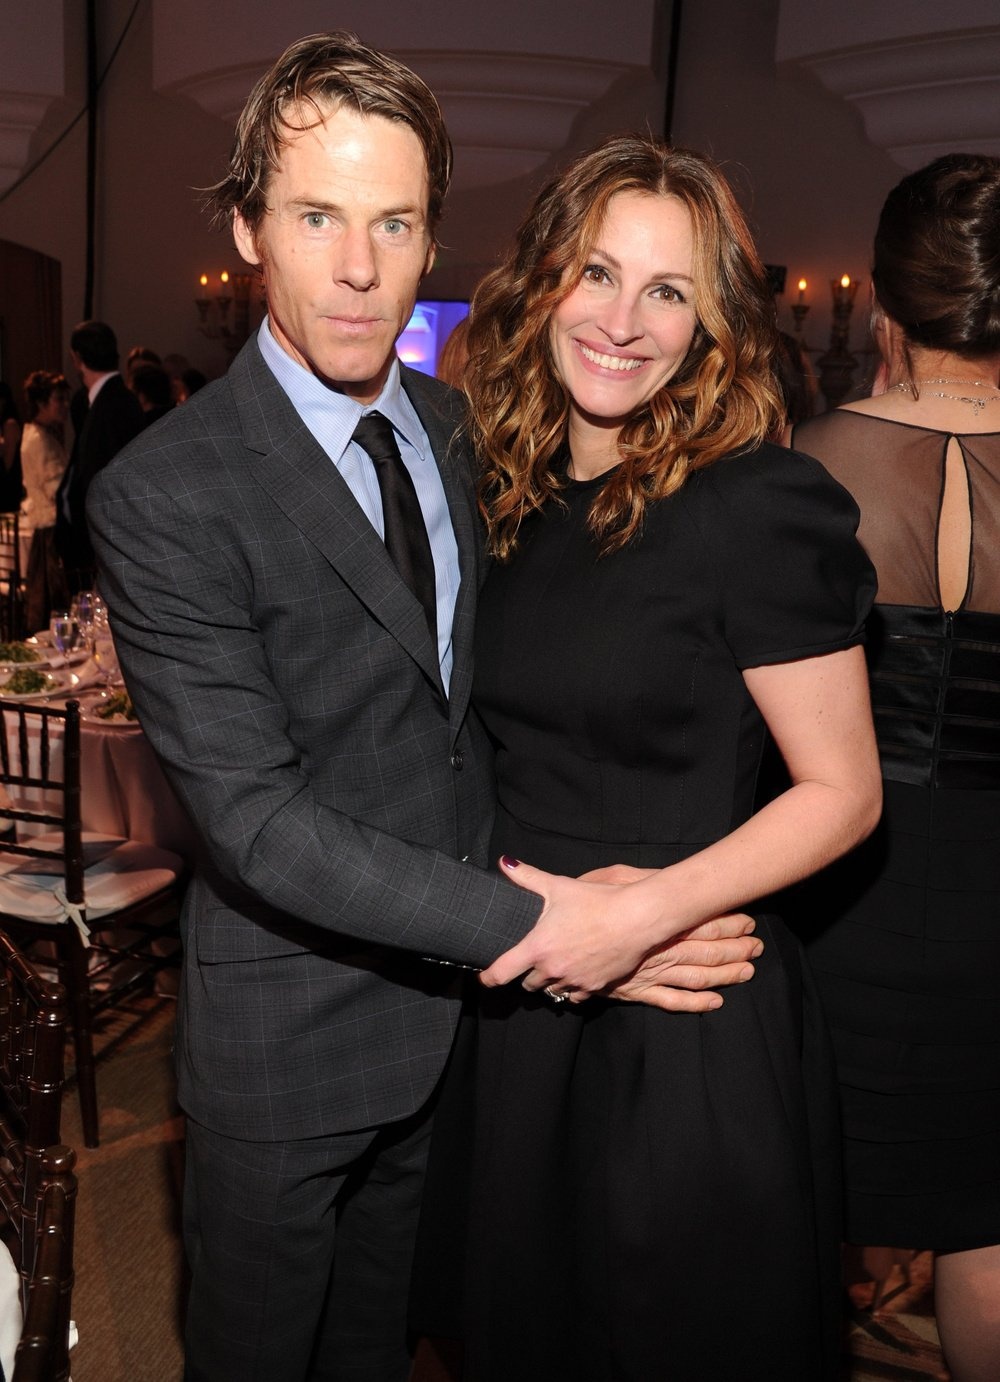 BEVERLY HILLS, CA - JANUARY 11:  Danny Moder and Julia Roberts attend  the 3rd annual Sean Penn & Friends HELP HAITI HOME Gala benefiting J/P HRO presented by Giorgio Armani at Montage Beverly Hills on January 11, 2014 in Beverly Hills, California.  (Photo by Kevin Mazur/Getty Images for J/P Haitian Relief Organization)